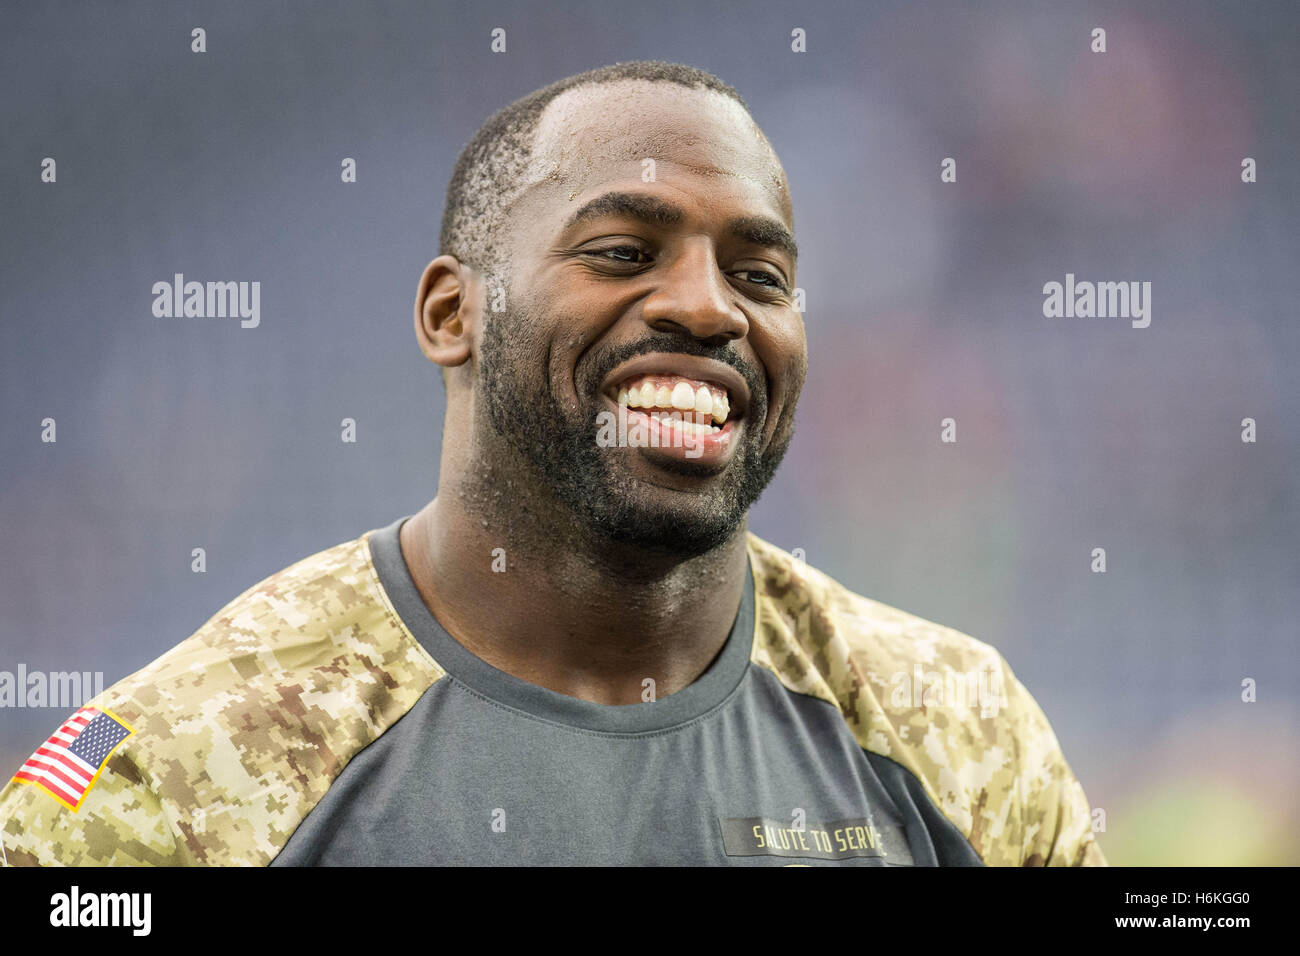 Houston, Texas, USA. 30th Oct, 2016. Houston Texans outside linebacker Whitney Mercilus (59) smiles prior to an NFL game between the Houston Texans and the Detroit Lions at NRG Stadium in Houston, TX on October 30th, 2016. The Texans won the game 20-13. Credit:  Trask Smith/ZUMA Wire/Alamy Live News Stock Photo